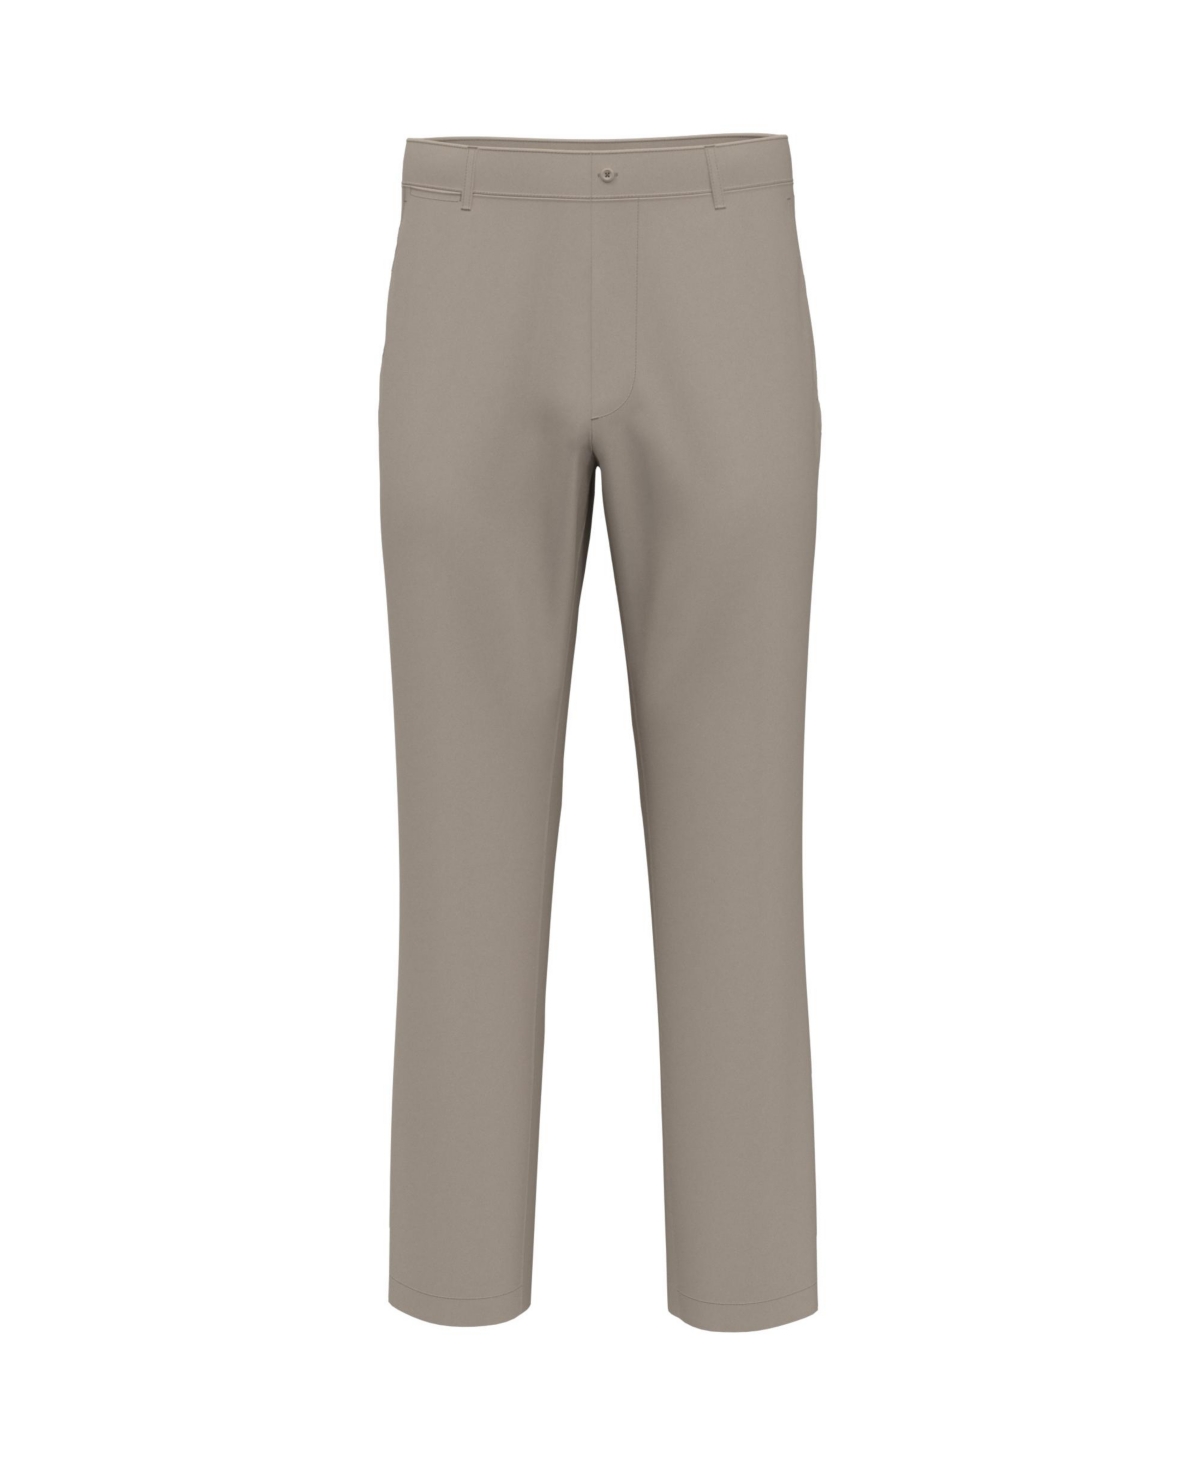 Pga Tour Kids' Big Boys Flat Front Expandable Pants In Silver Lining